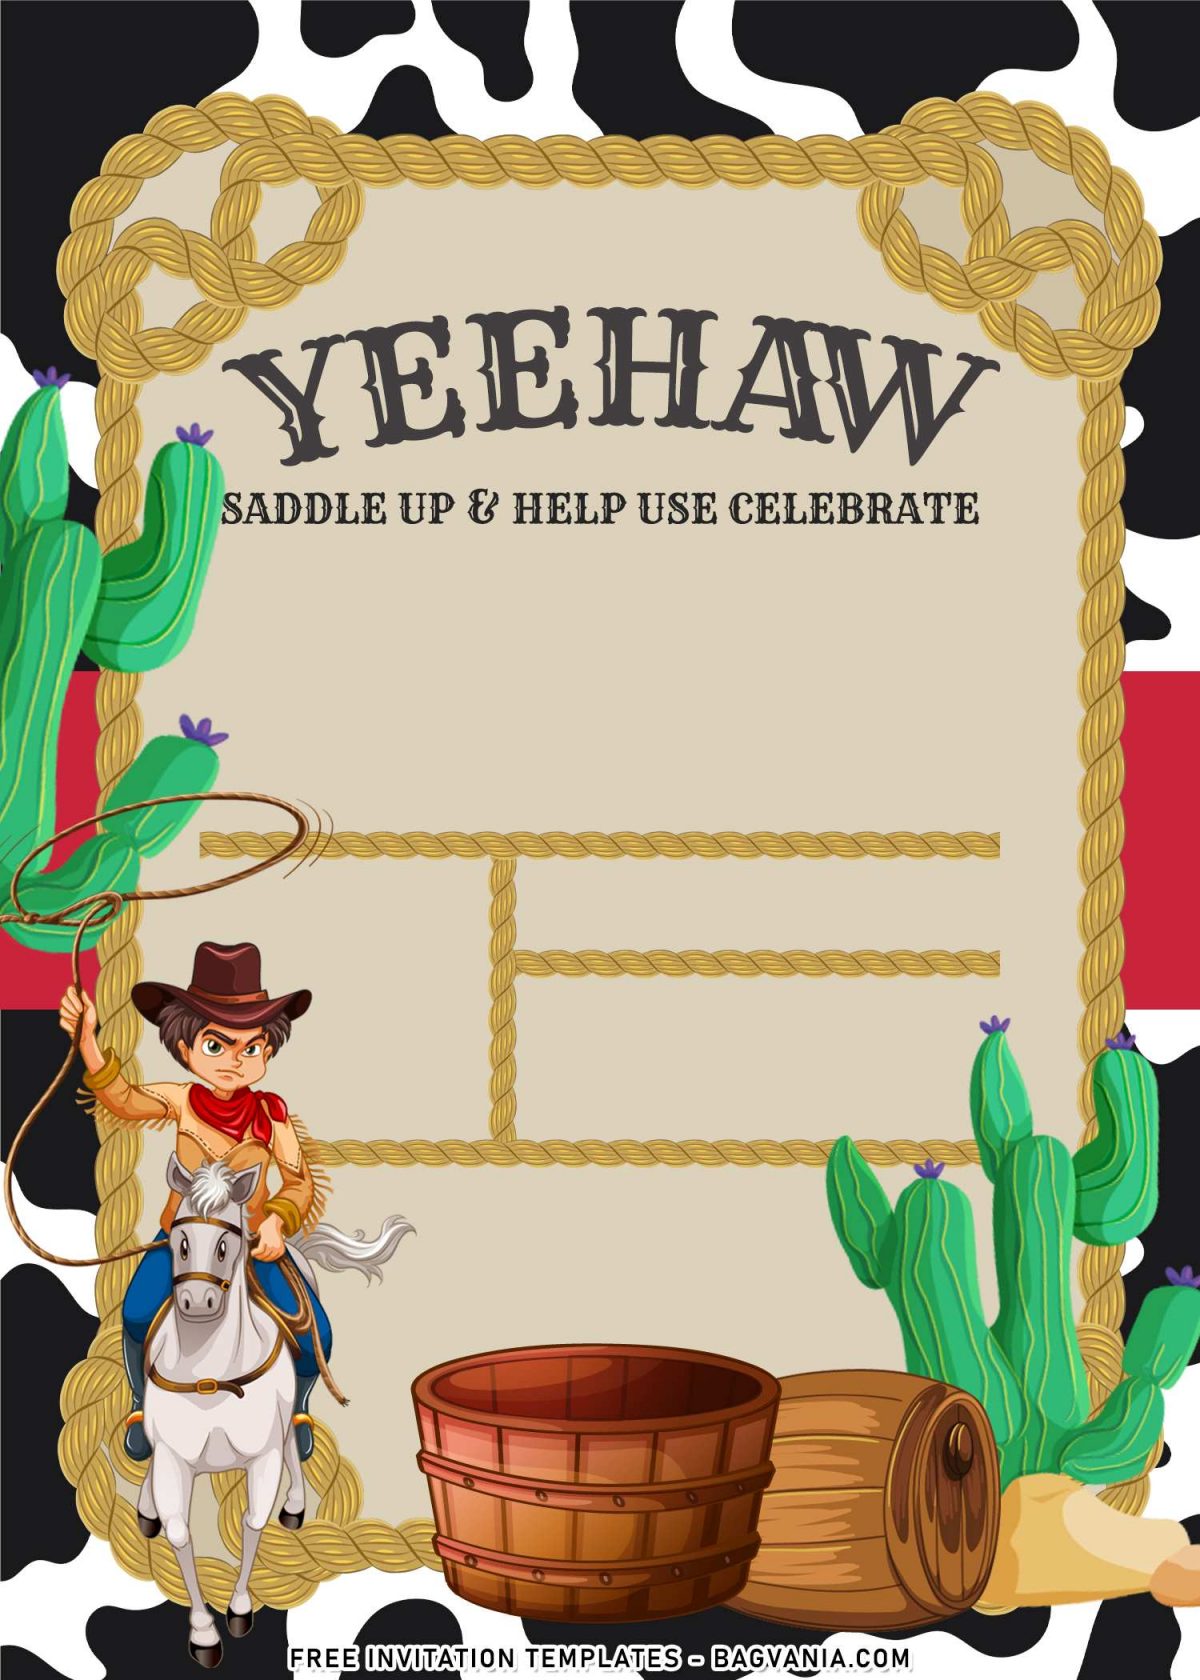 7+ Western Cowboy Birthday Invitation Templates with lasso text frame